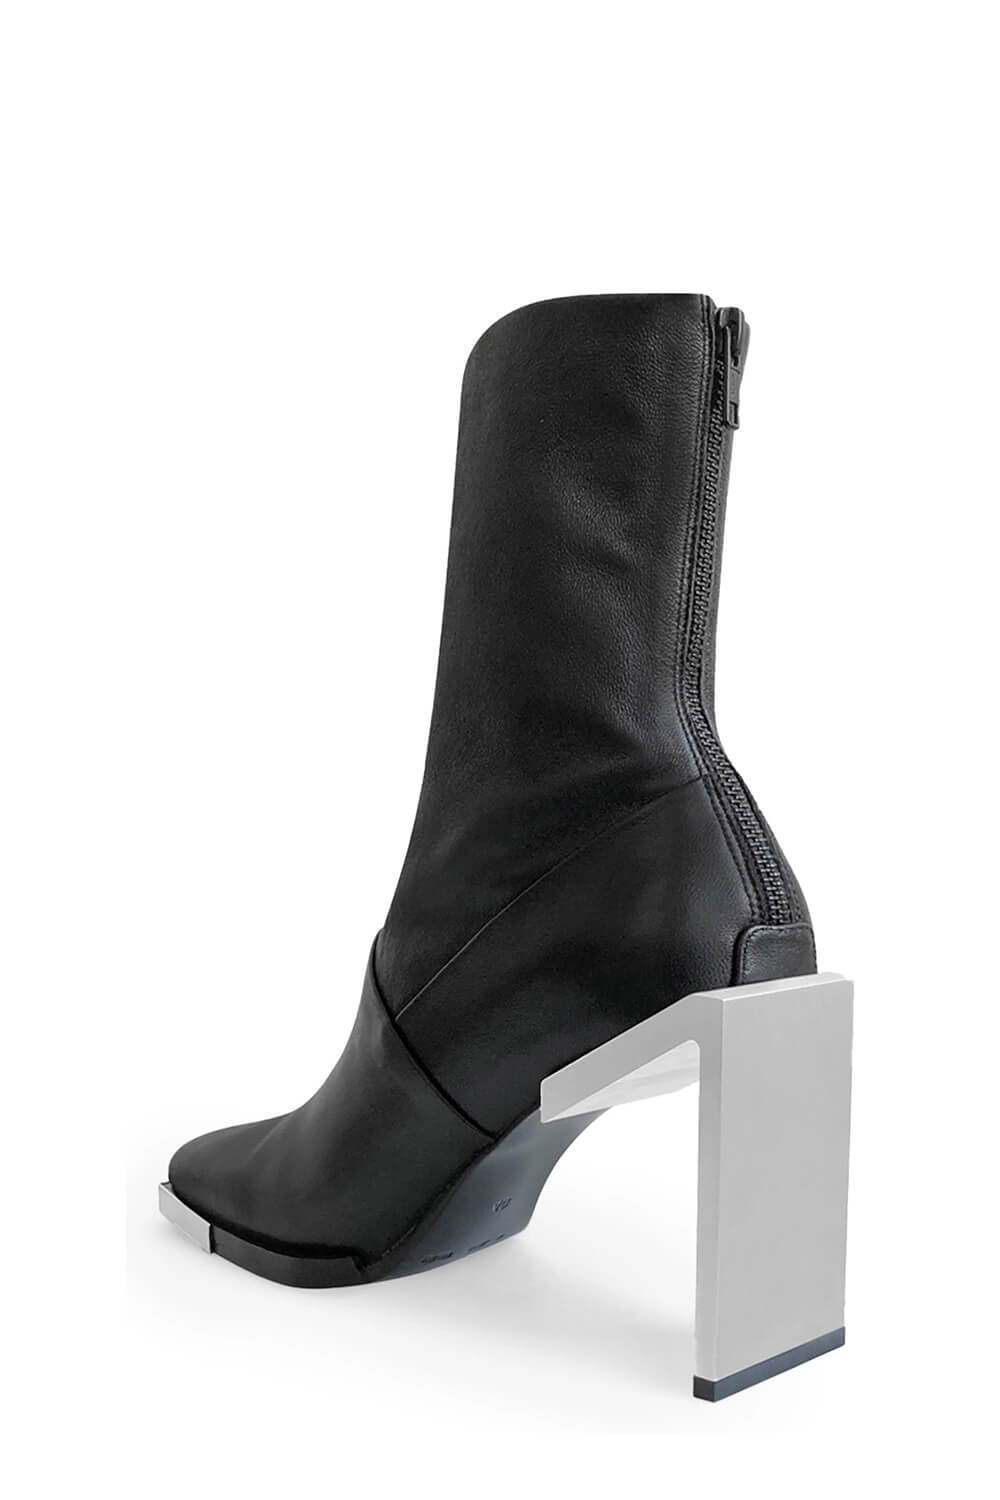 Black Faux Leather Squared Toe Metal Heel Ankle High Boots